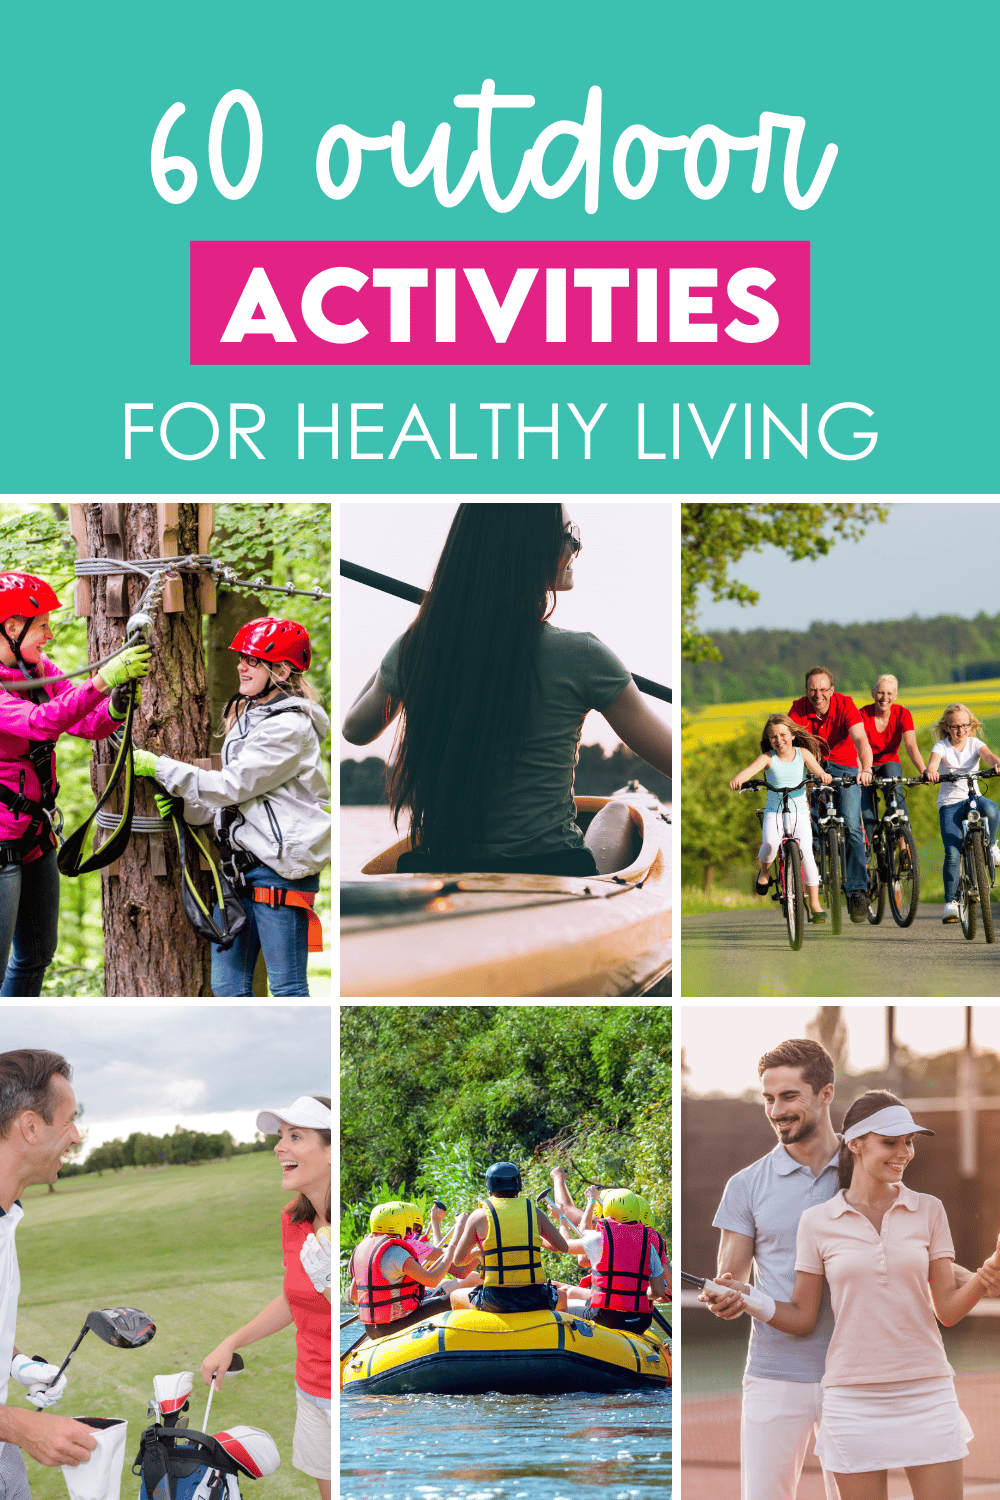 Bangles Sex 16yers Hot - Top 60 Outdoor Activities for Healthy Living | The Dating Divas